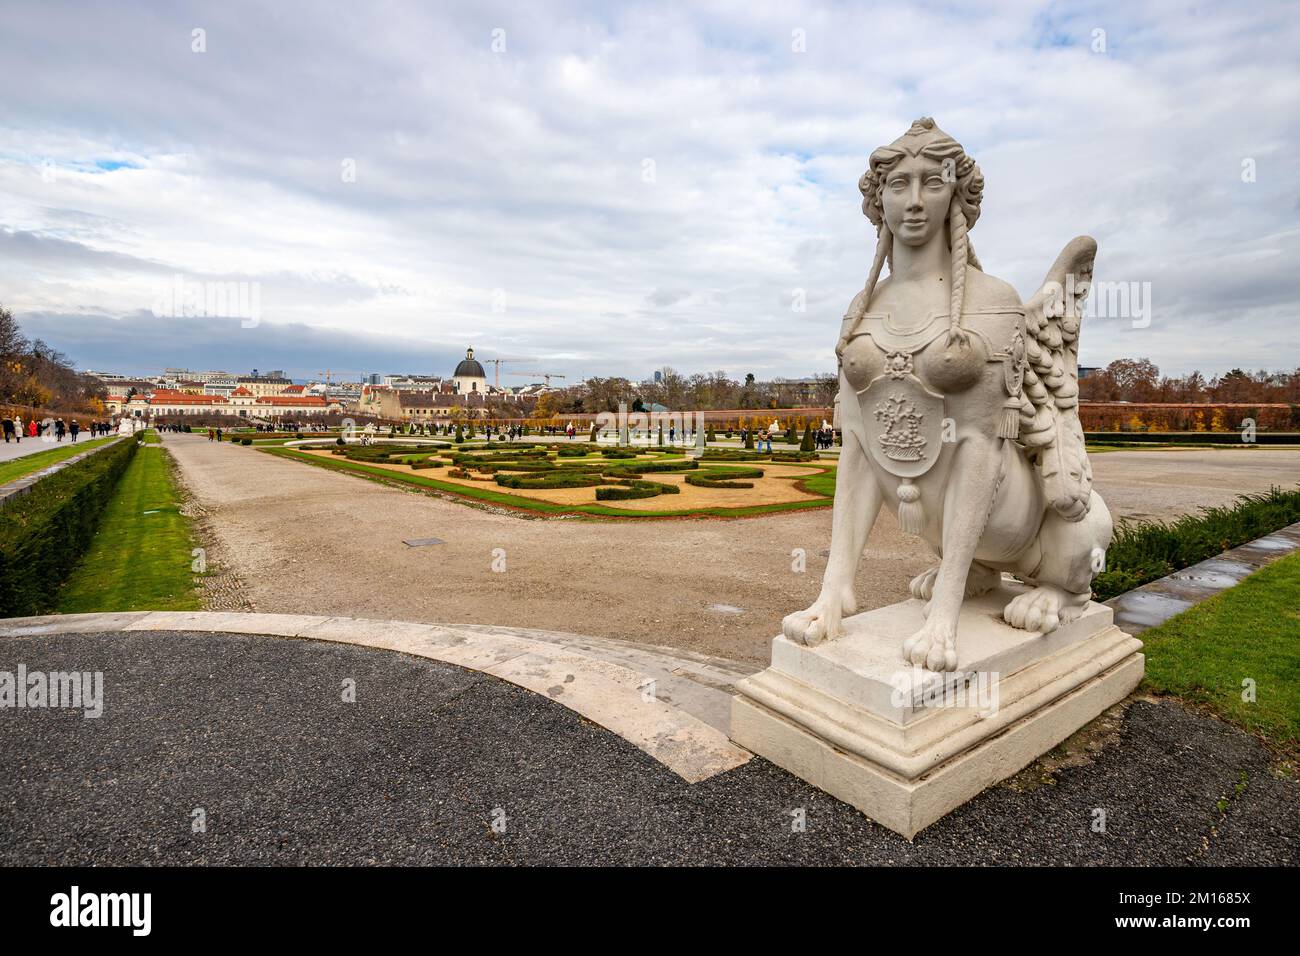 Cityscape with the garden of Schloss Belvedere in Vienna and its statue. Belvedere Castle during the Christmas holidays. Stock Photo